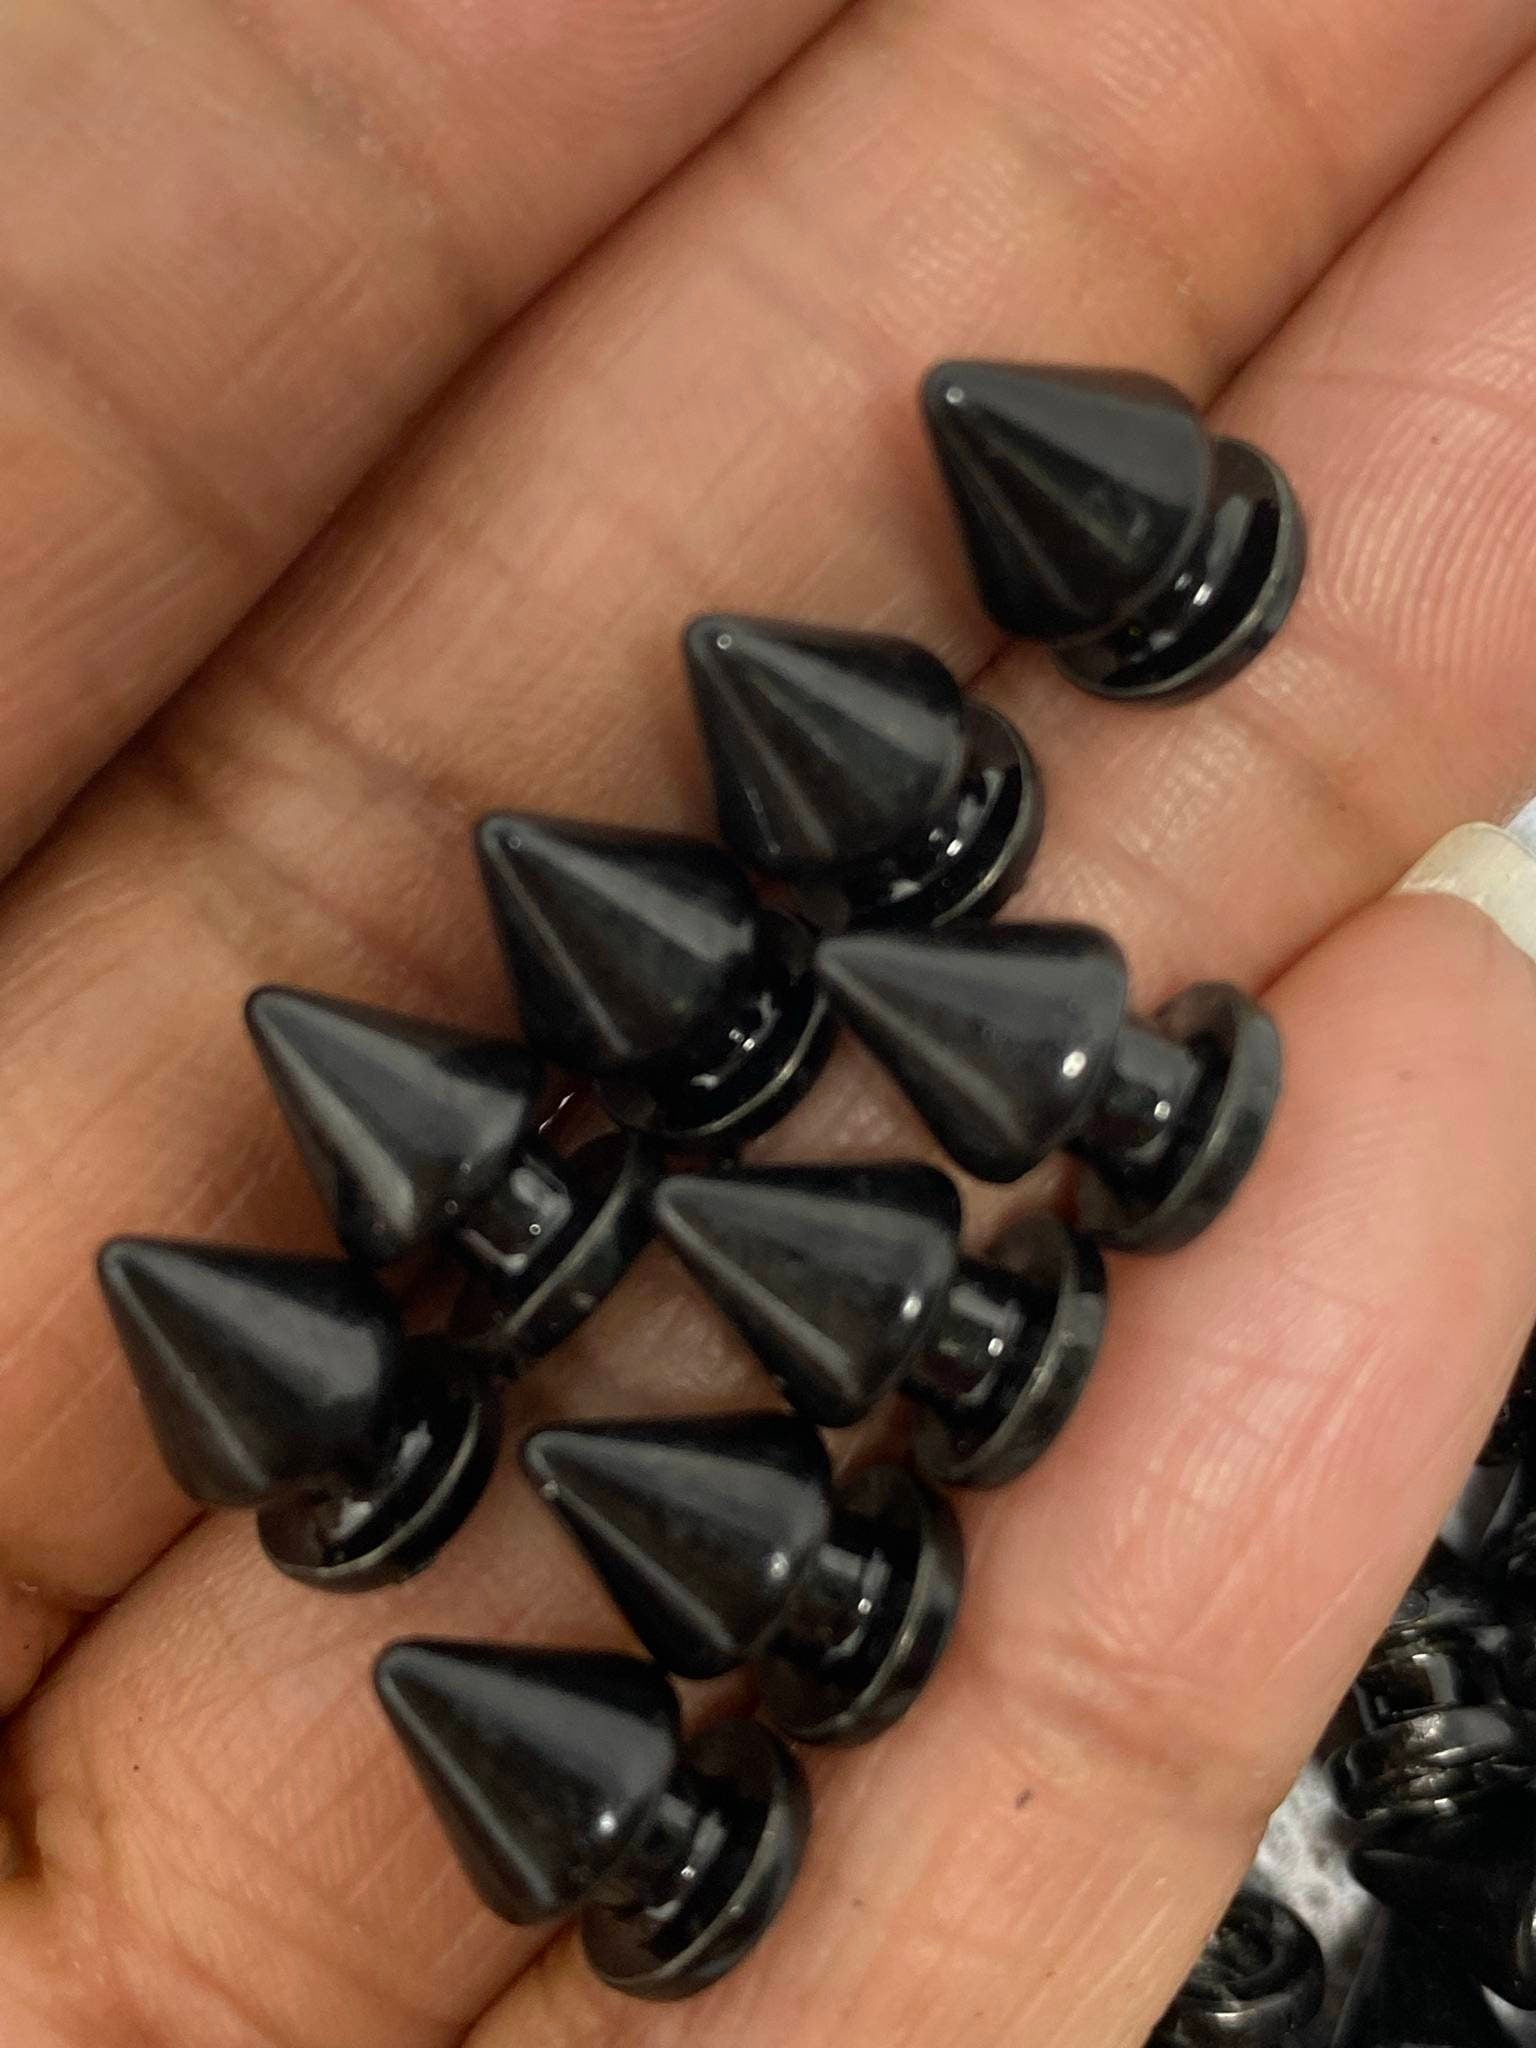 New,Black Spikes, 12mm, 100-pcs, Spikes w/Screws, Small Cone